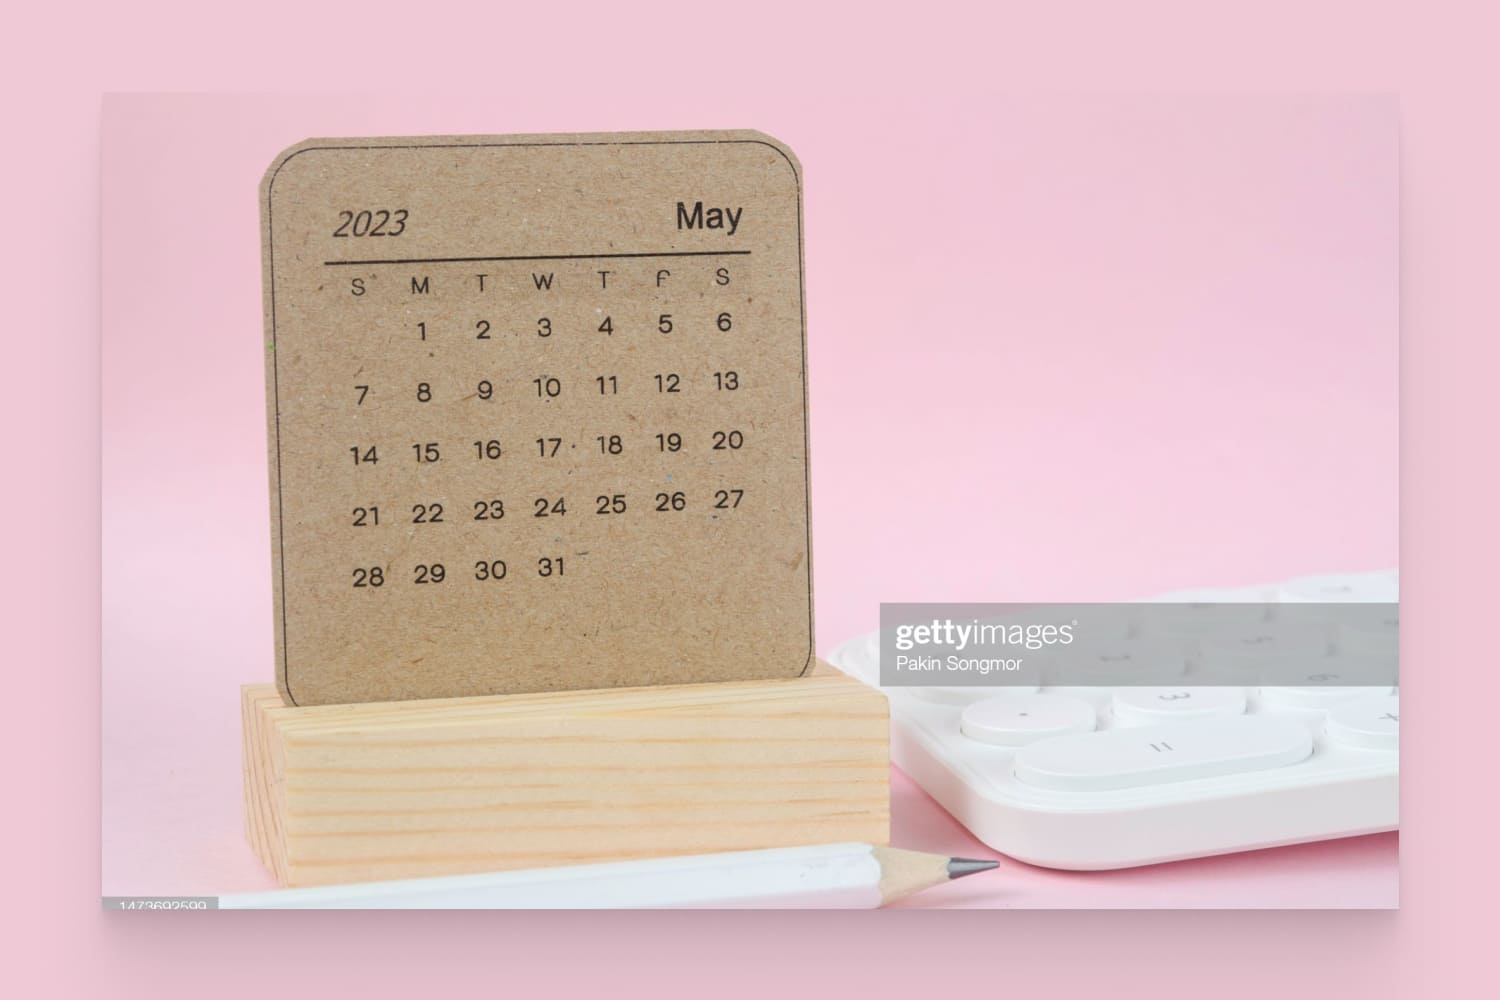 Calendar for May 2023 with a white pencil and calculator against a pink paper background